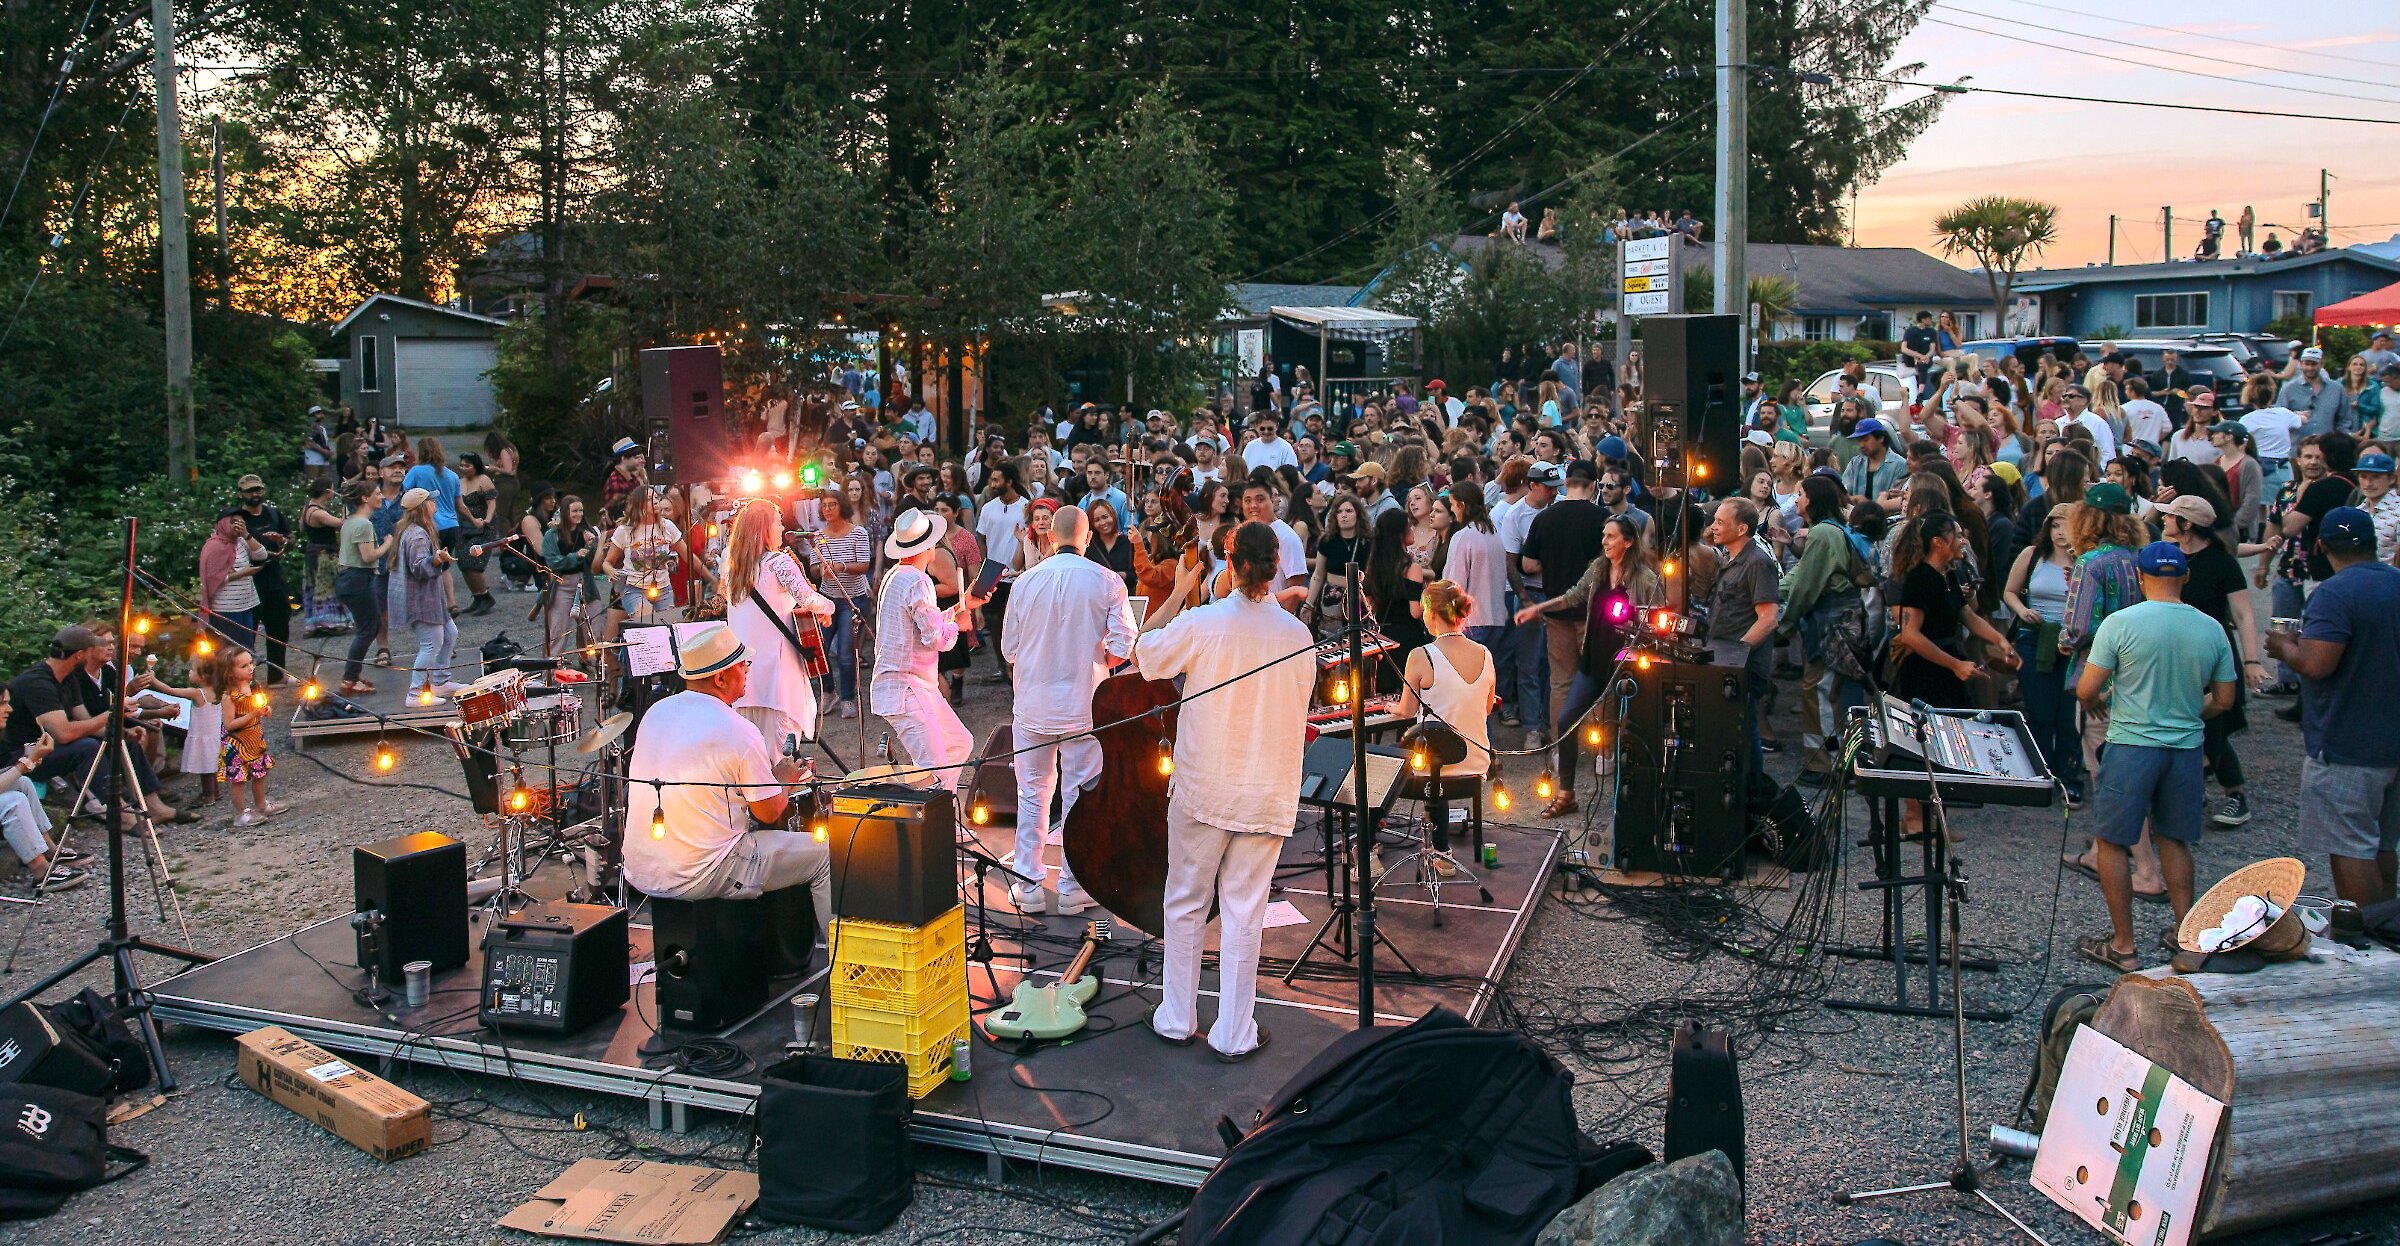 Large group gathering in front of a jazz band playing on an outdoor stage